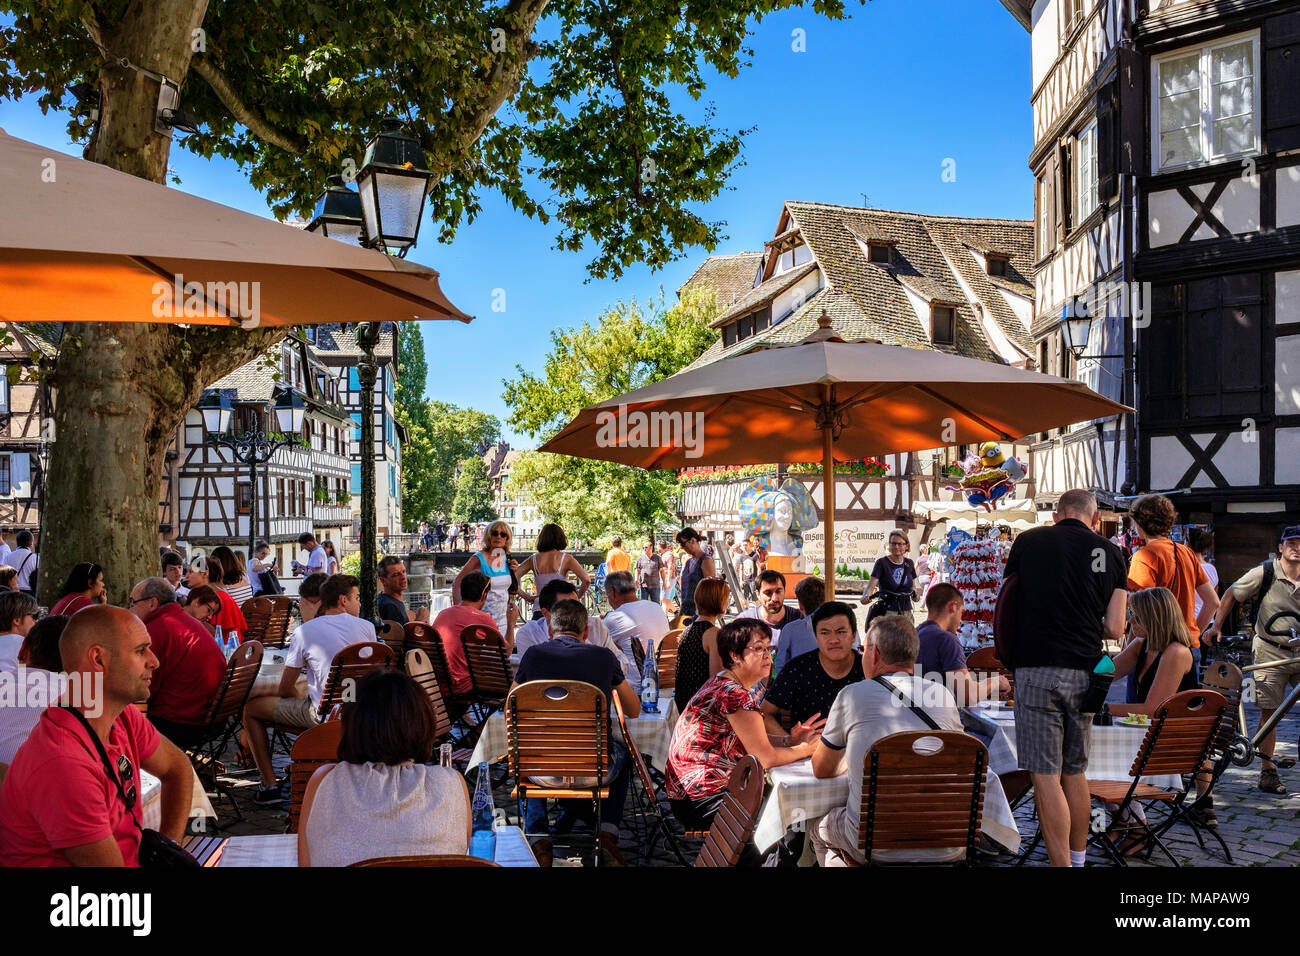 Alfresco cafe terrace, customers lunching, half-timbered houses, place Benjamin Zix square, La Petite France, Strasbourg, Alsace, France, Europe Stock Photo